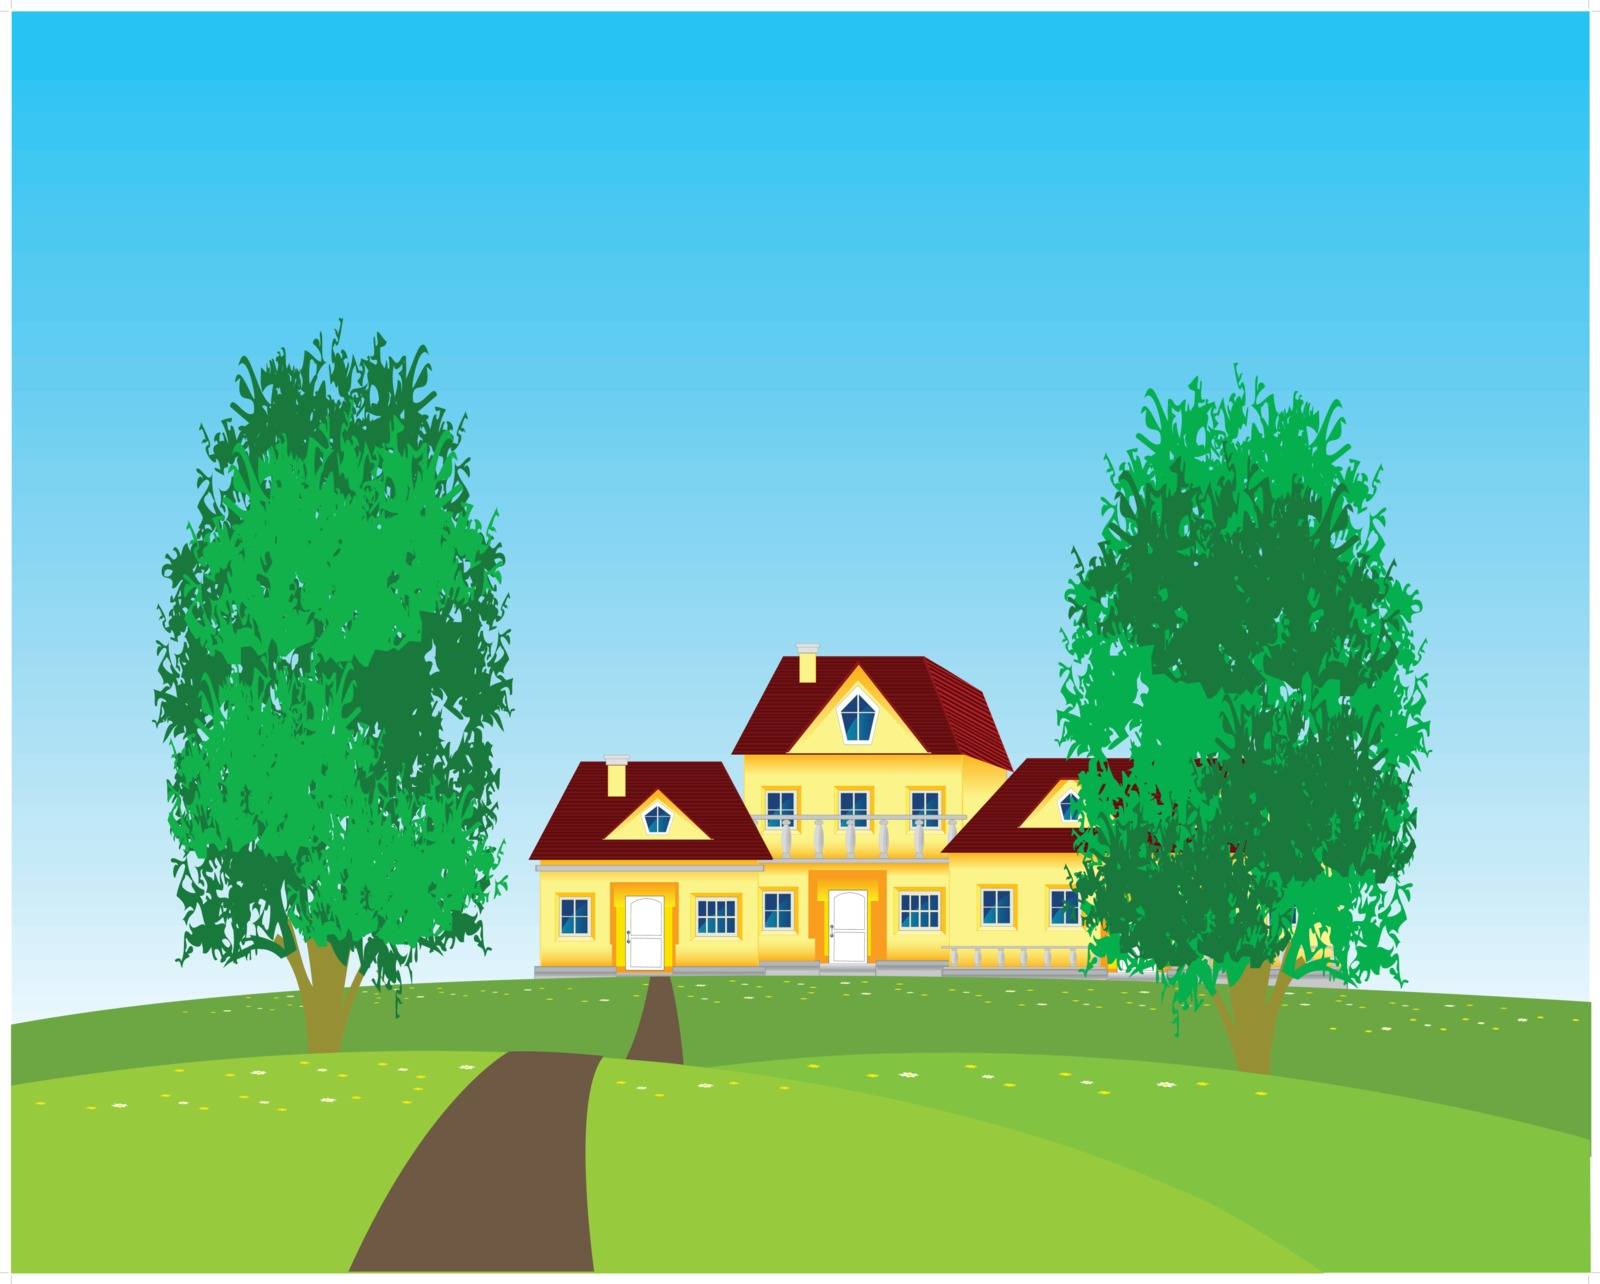 Vector illustration to rural terrain and houses on nature